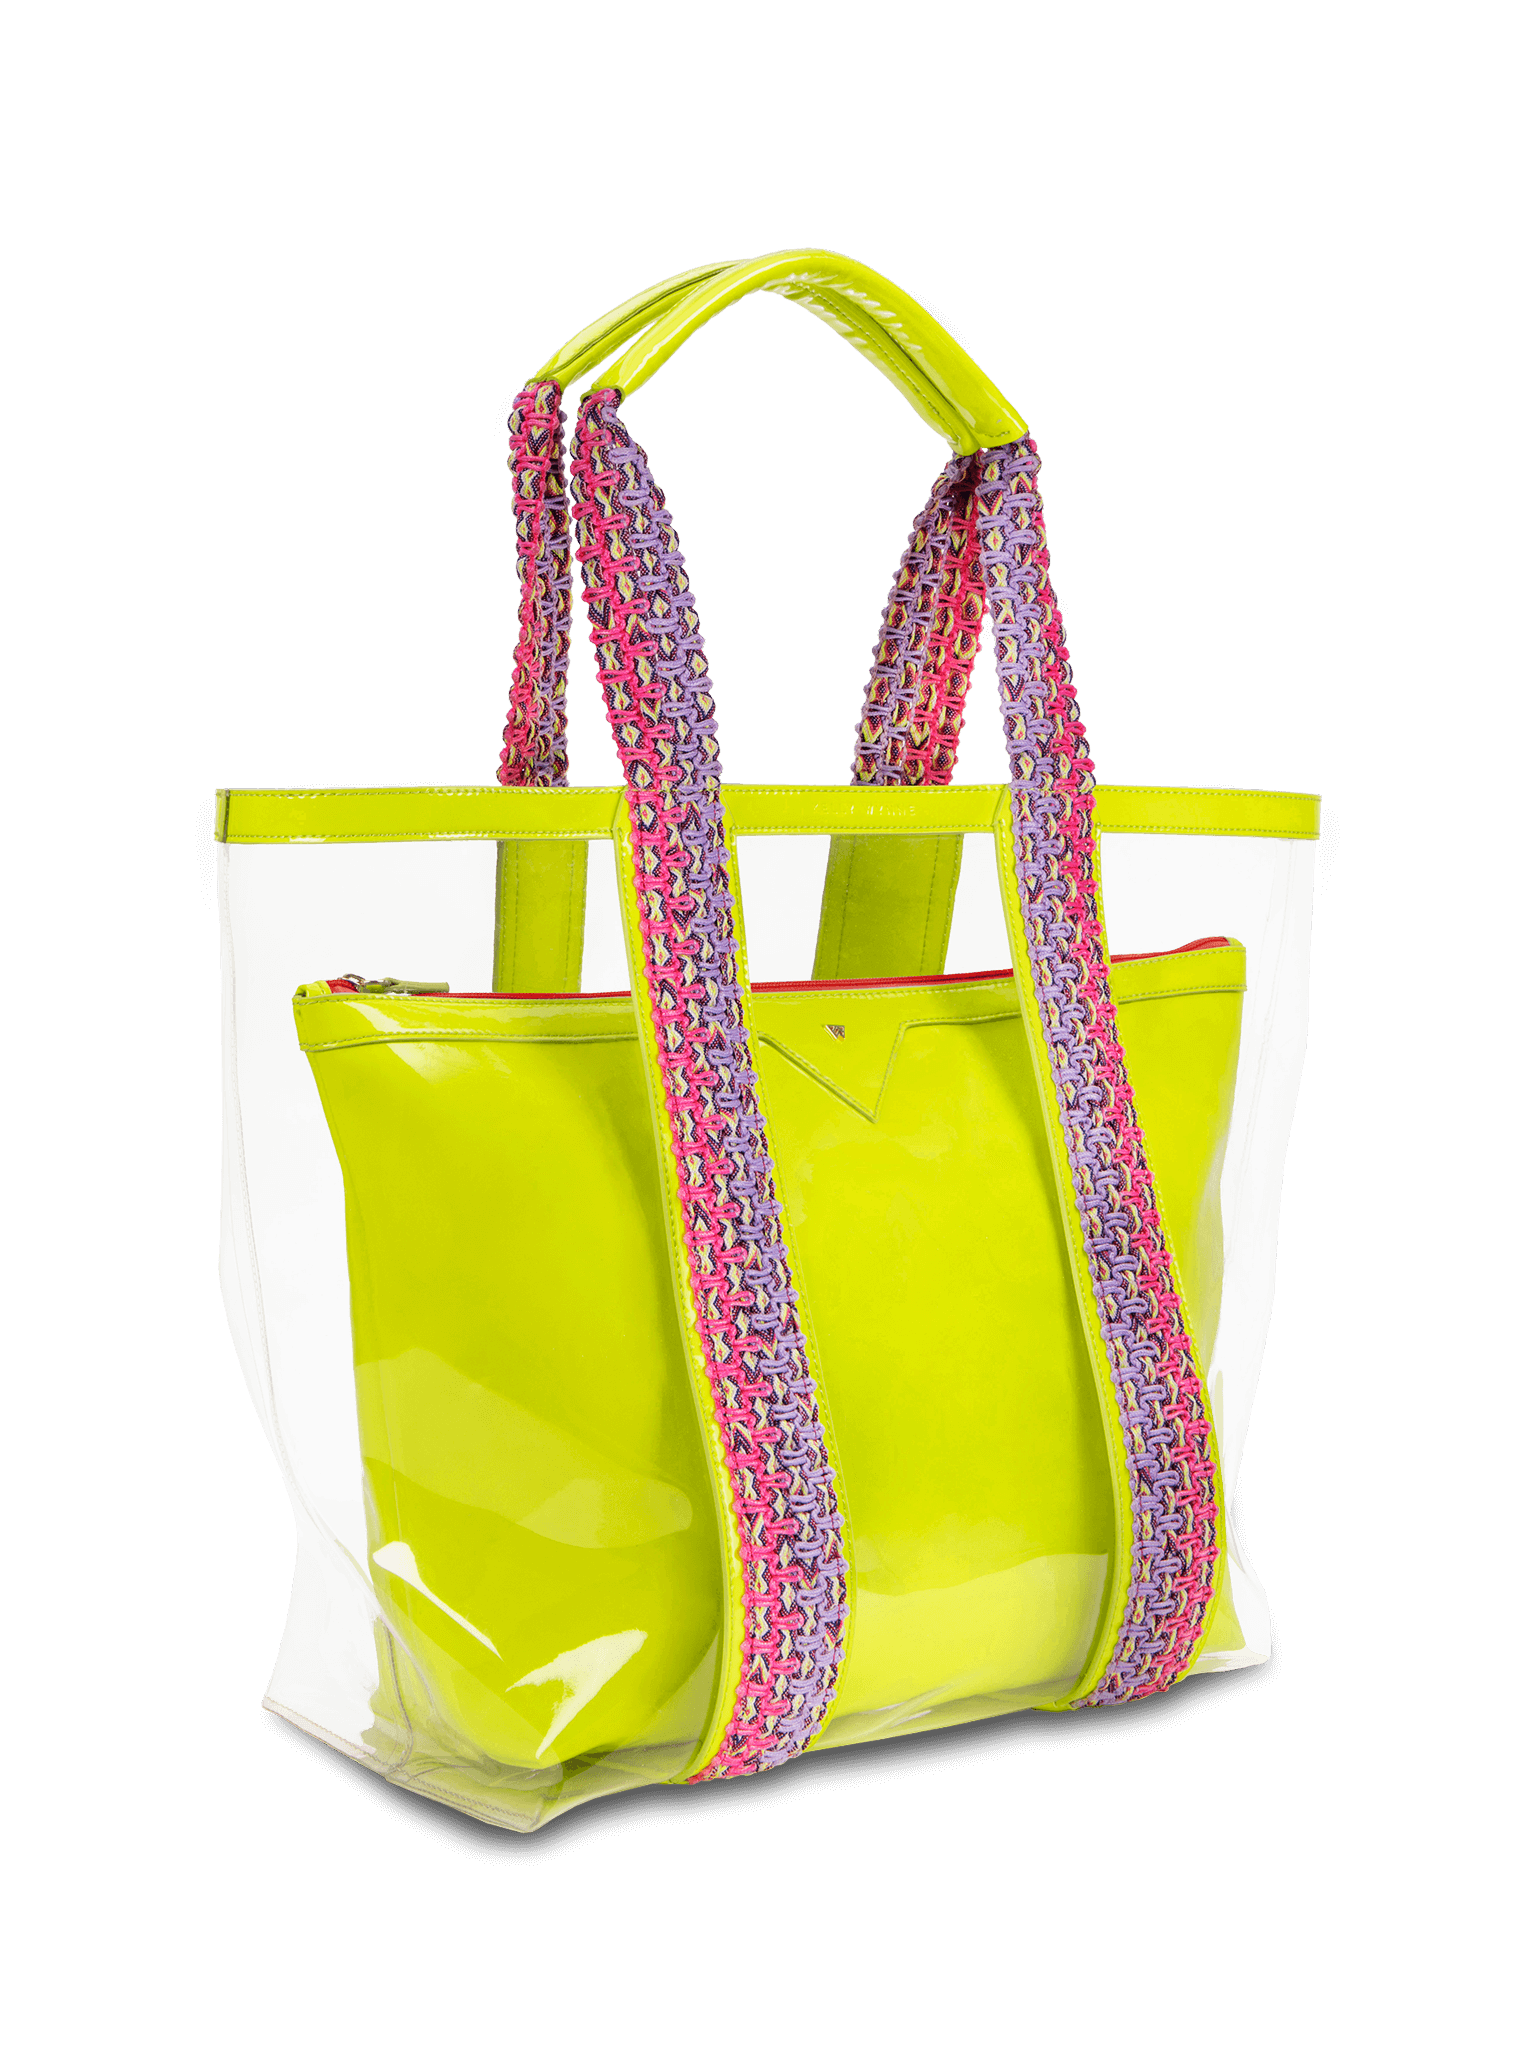 Clear exterior tote large enough to pack all your summer essentials. Waterproof material to make cleaning a breeze. Removable interior pouch made with water resistant vegan leather in neon yellow. 